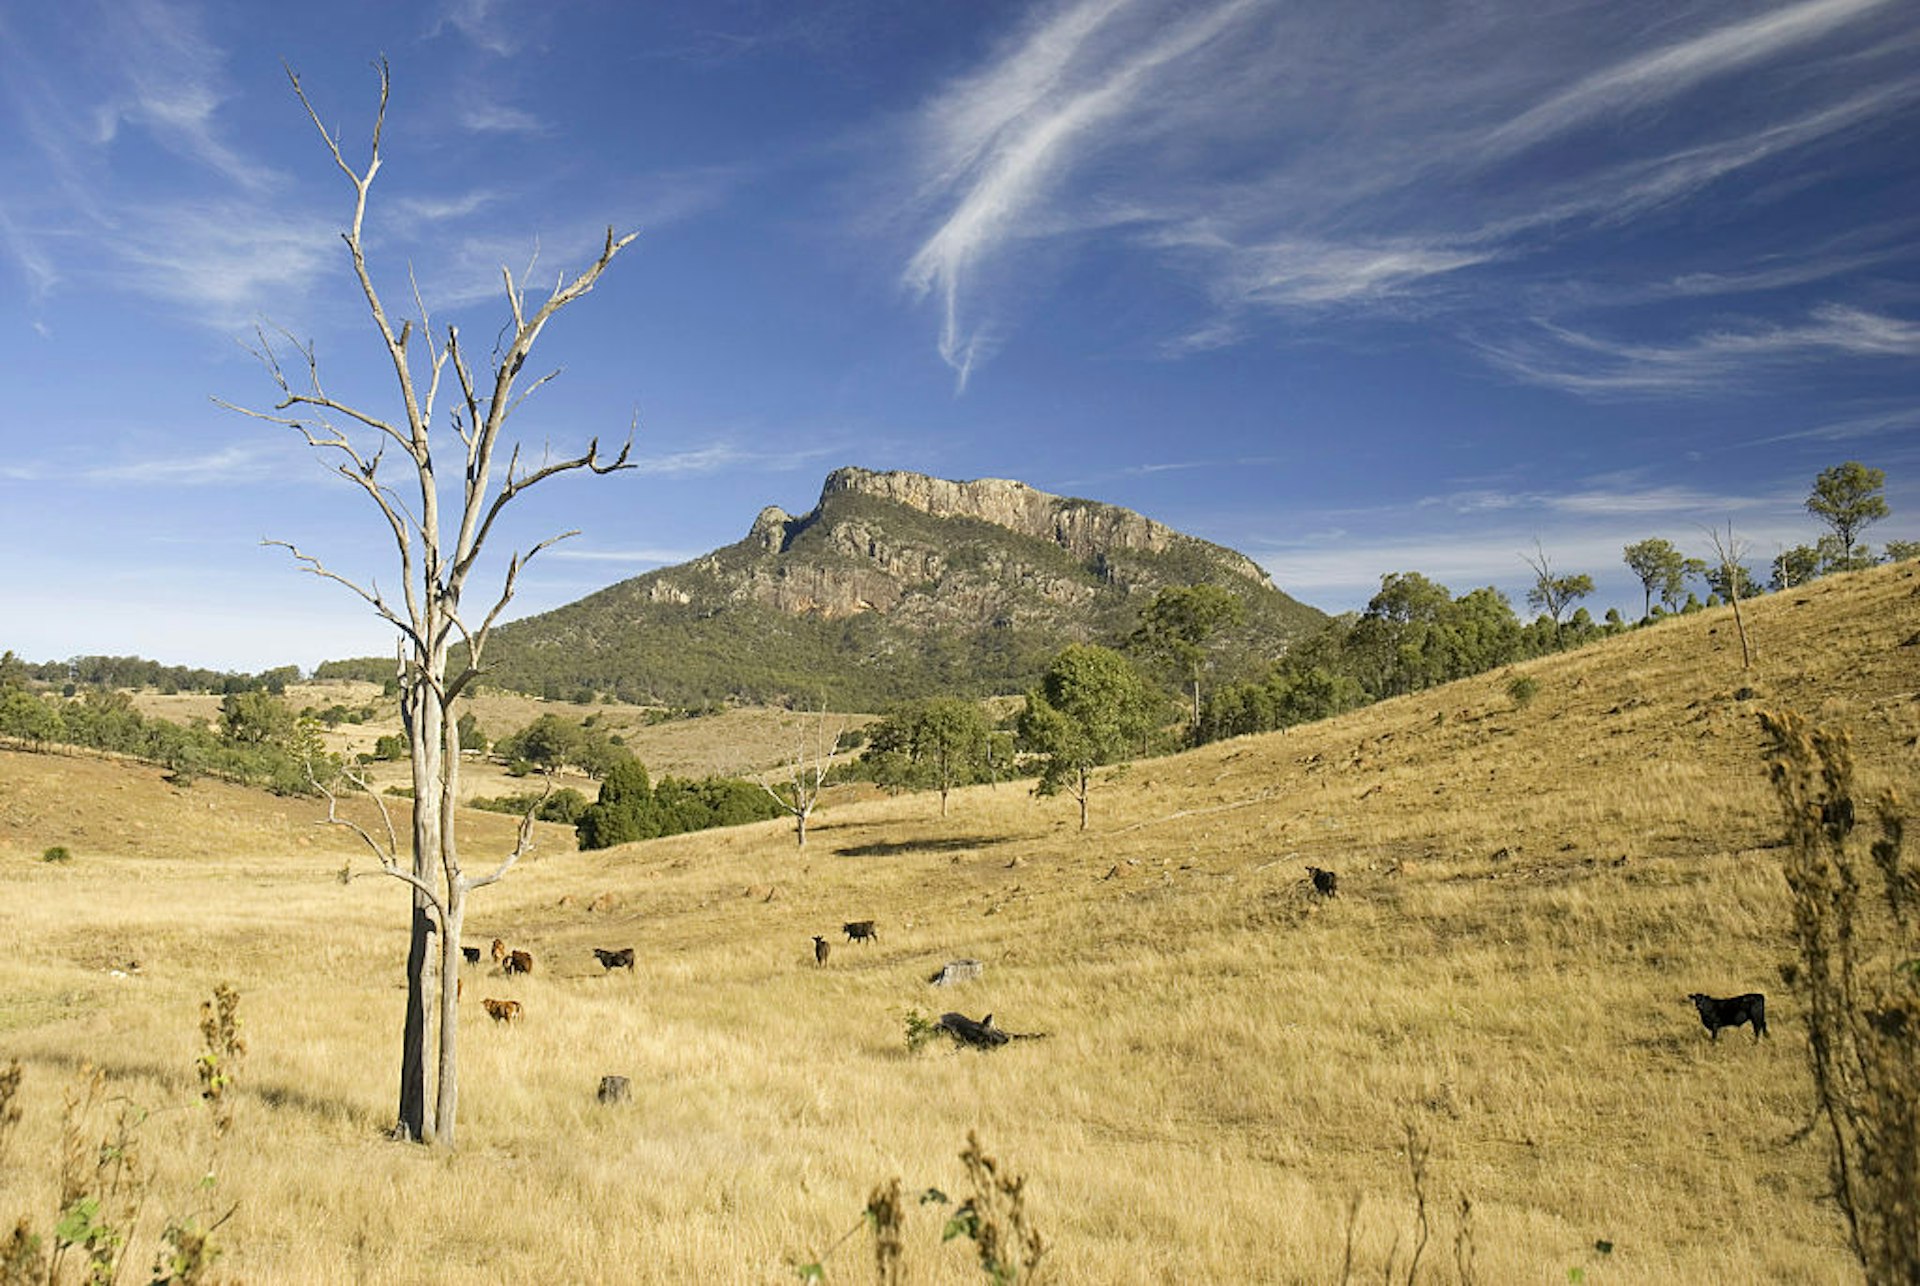 Mount Maroon with cirrus cloud overhead in Mount Barney National Park in Australia